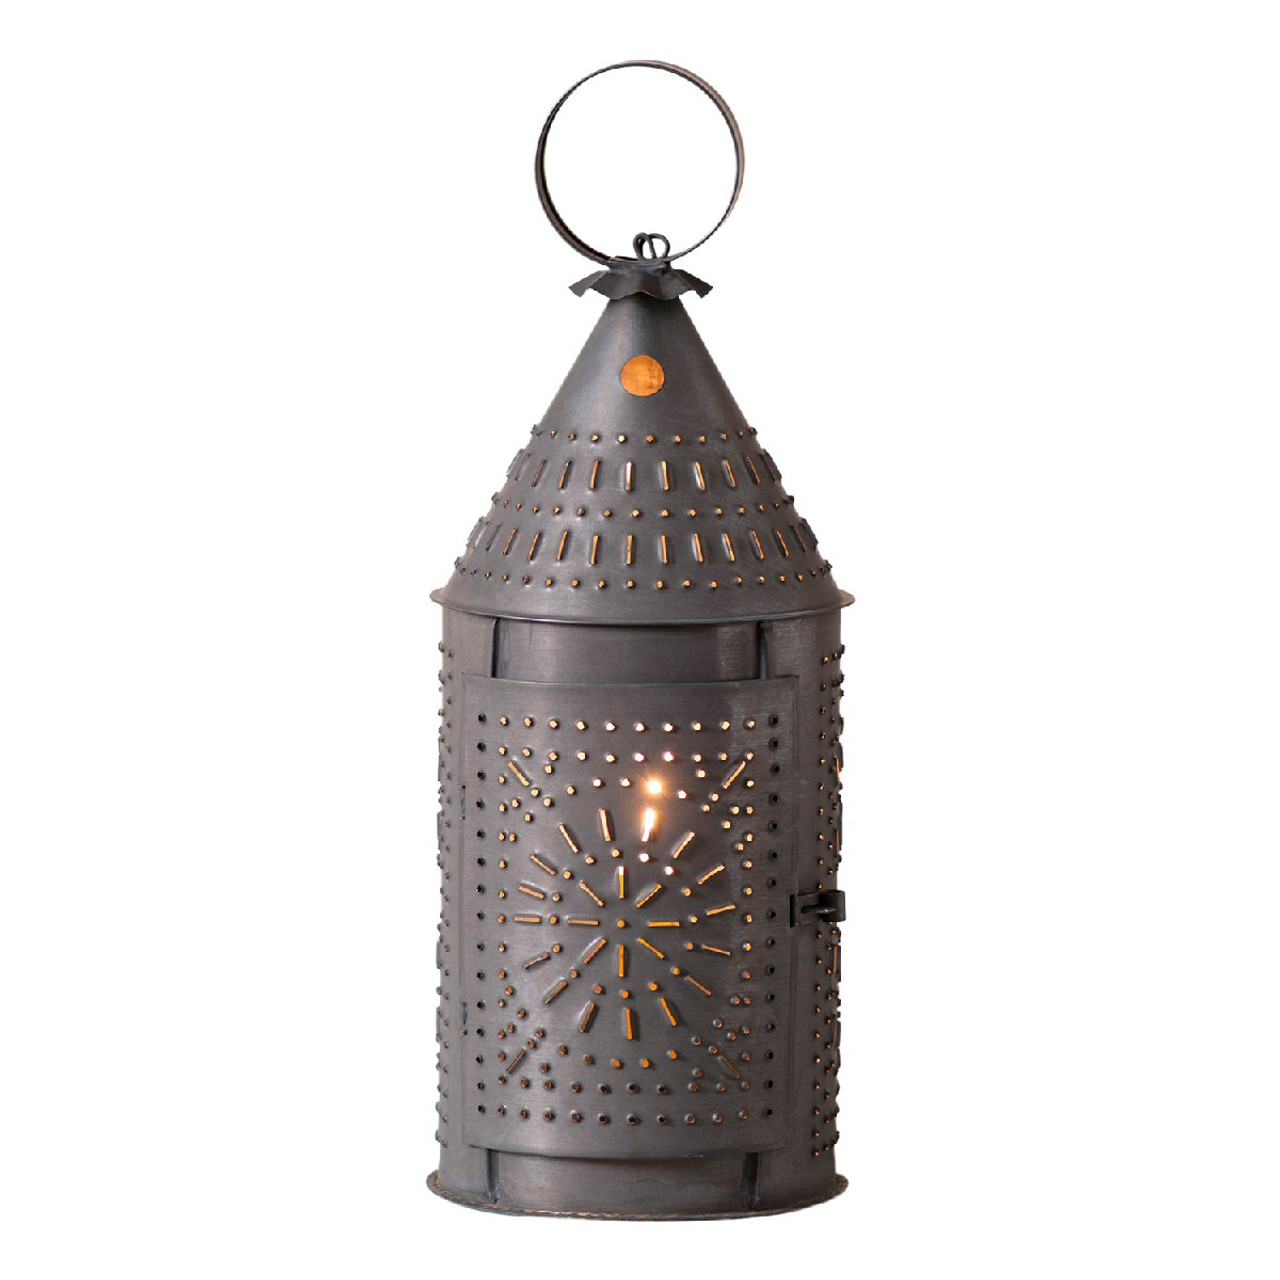 https://cdn11.bigcommerce.com/s-oo0gdojvjo/images/stencil/1280x1280/products/38488/49710/15-blackened-tin-revere-punched-chisel-pierced-tin-electric-lantern__68726.1549634570.jpg?c=2&imbypass=on